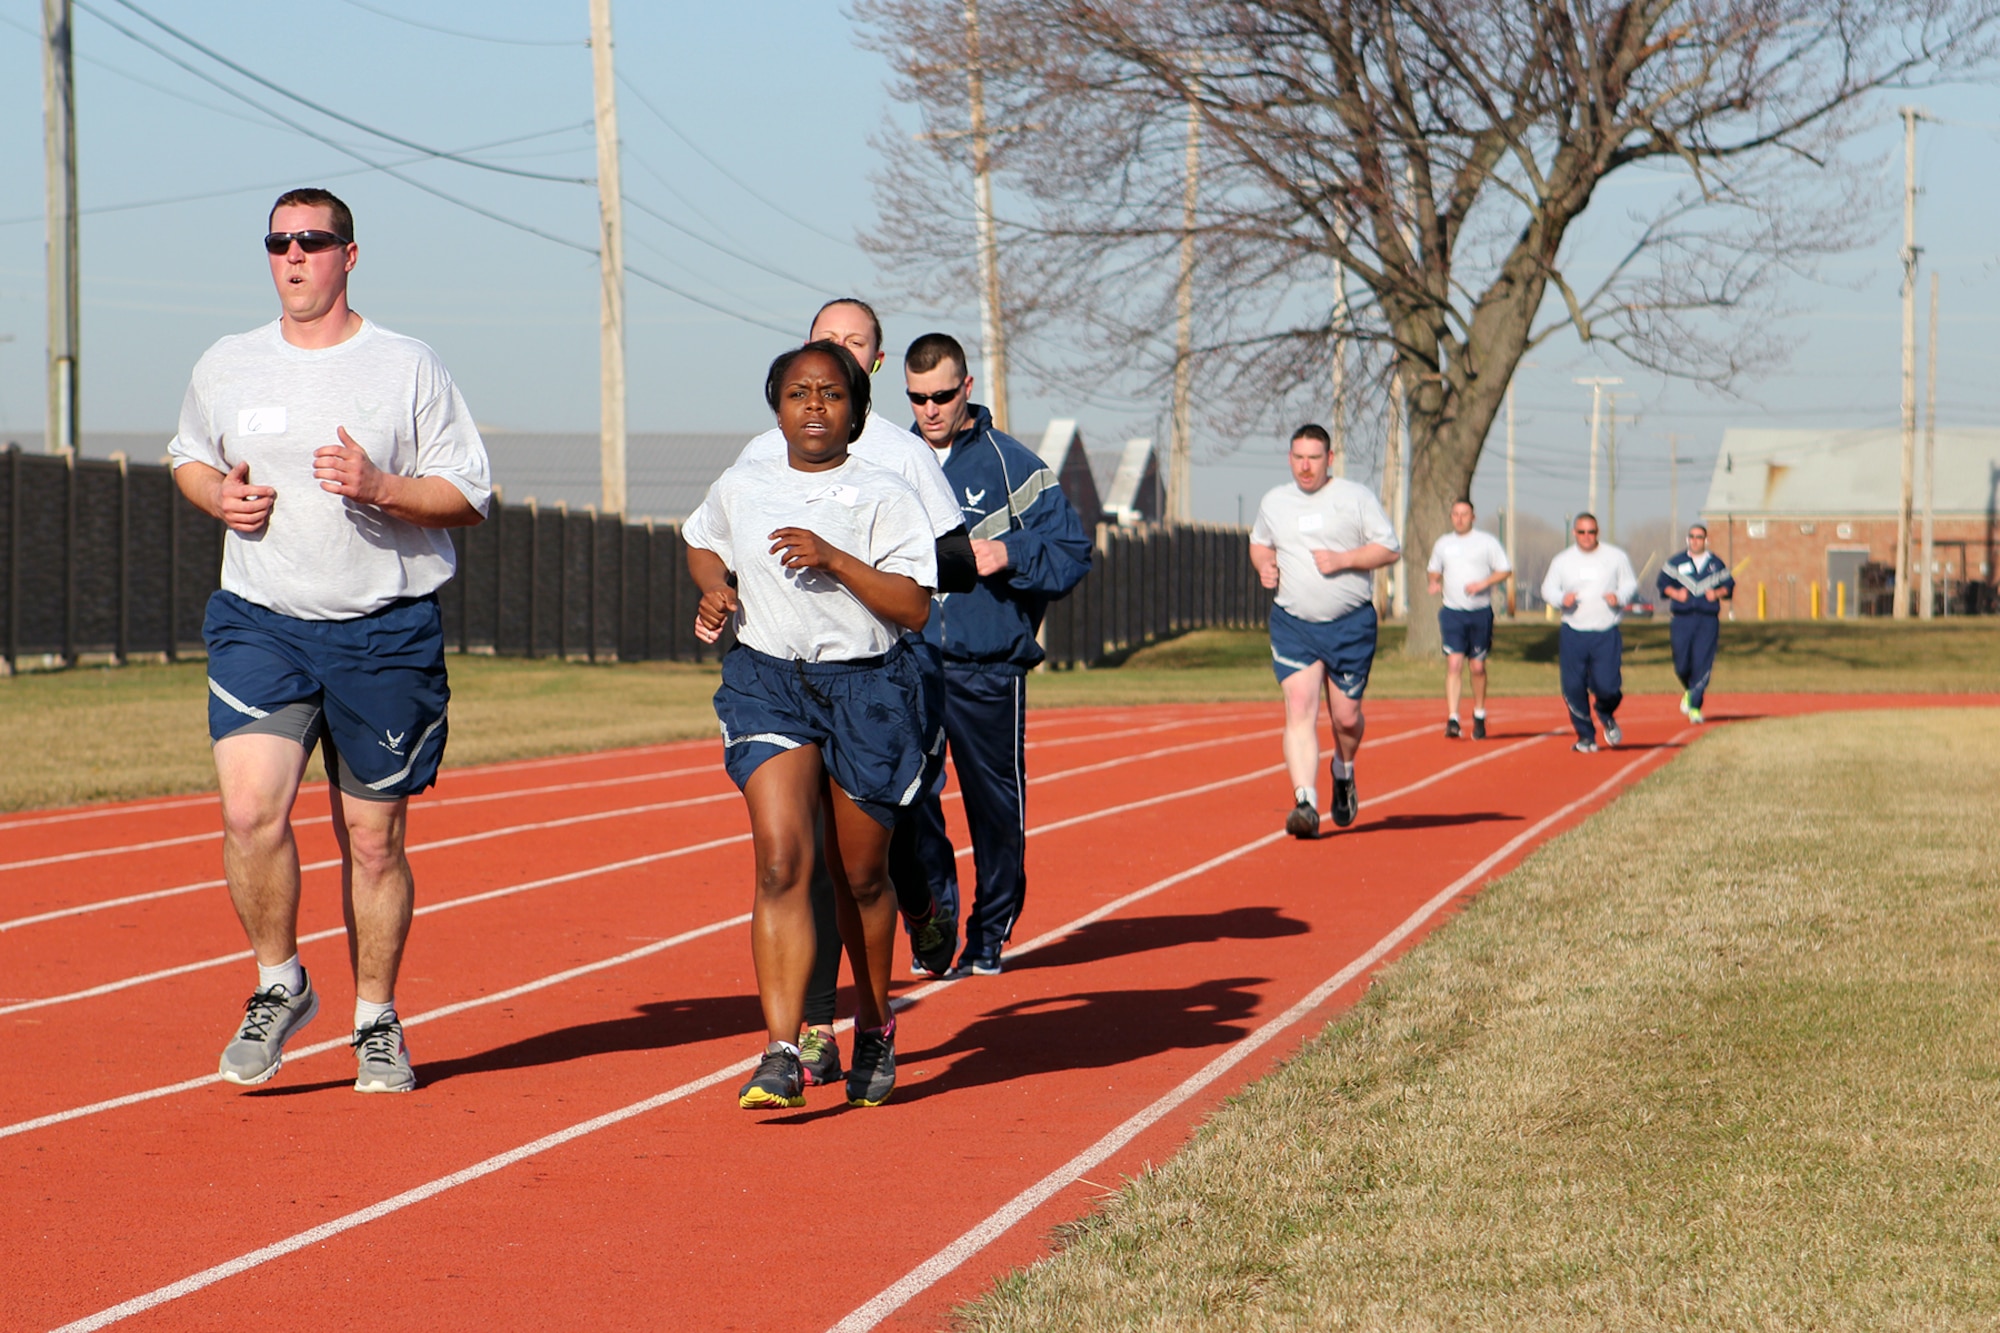 150412-Z-VA676-017 -- Airmen of the 127th Wing complete the run during their annual physical fitness assessment at Selfridge Air National Guard Base, Mich., April 12, 2015. Airmen are tested annually to ensure they continue to meet Air Force physical fitness standards. (U.S. Air National Guard photo by Tech. Sgt. Dan Heaton)